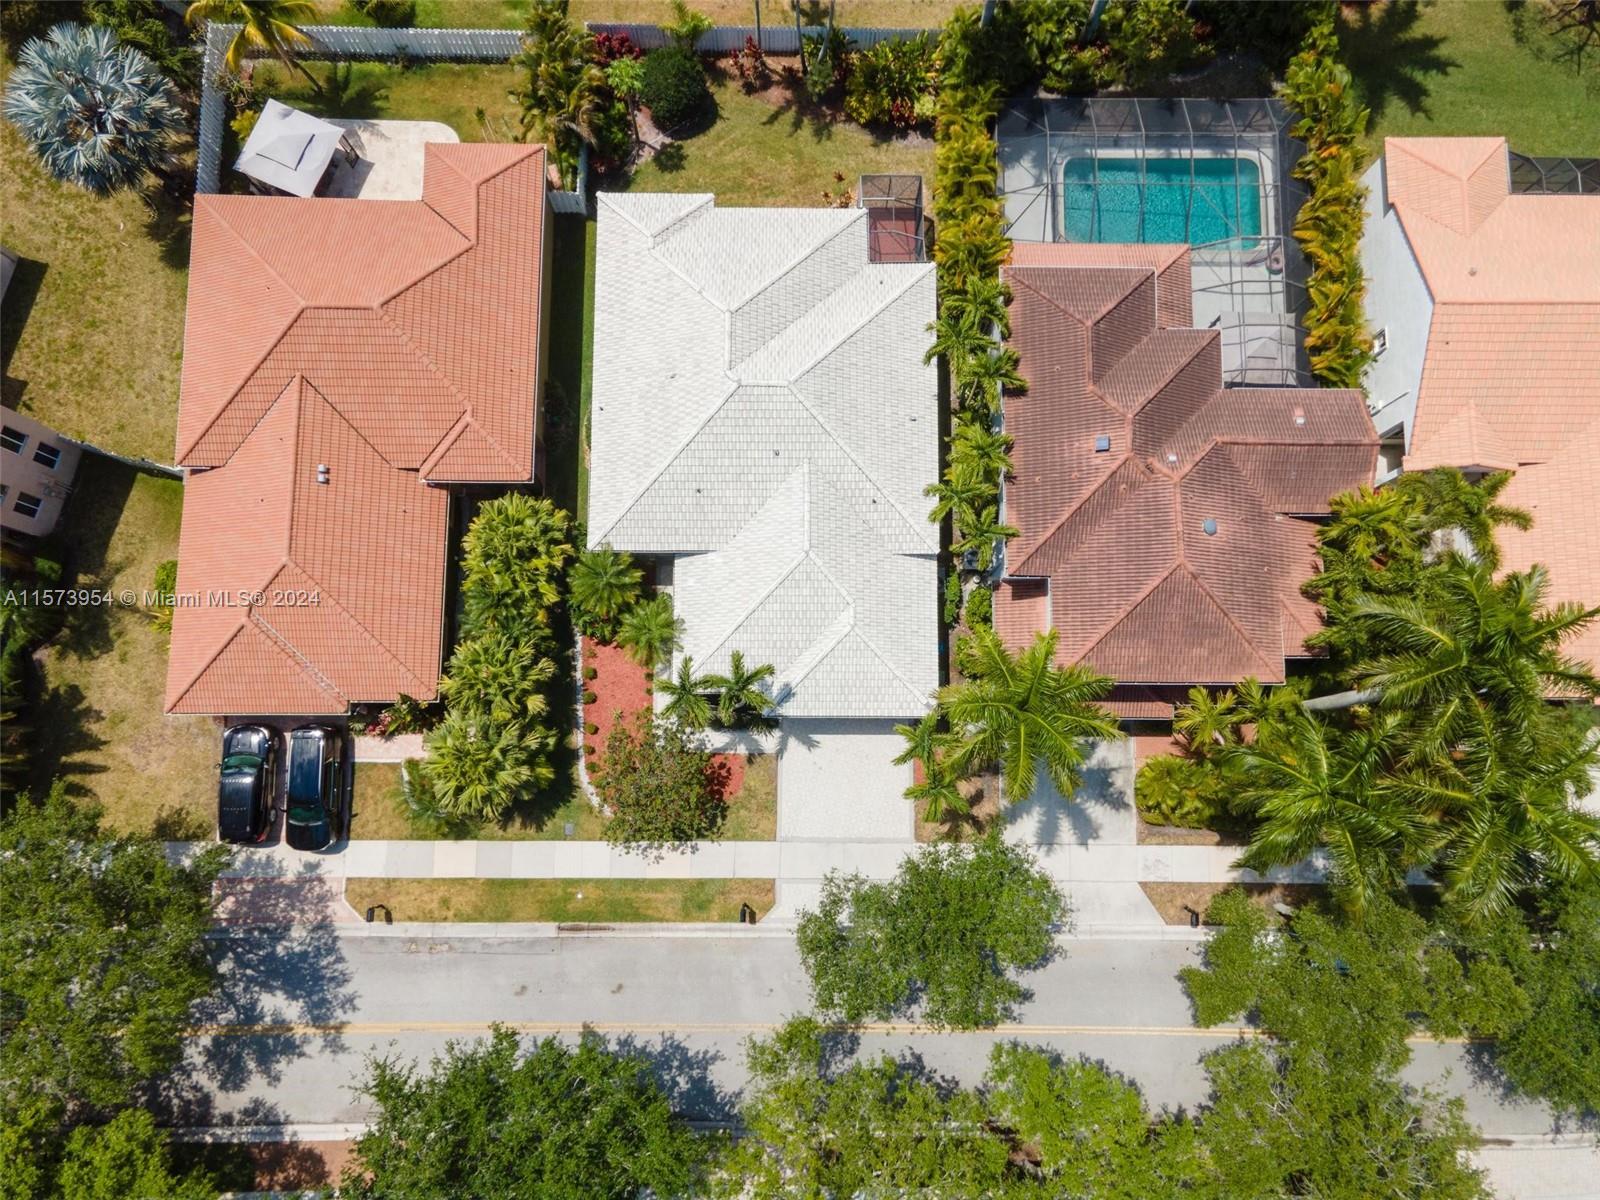 an aerial view of a house with a garden and swimming pool